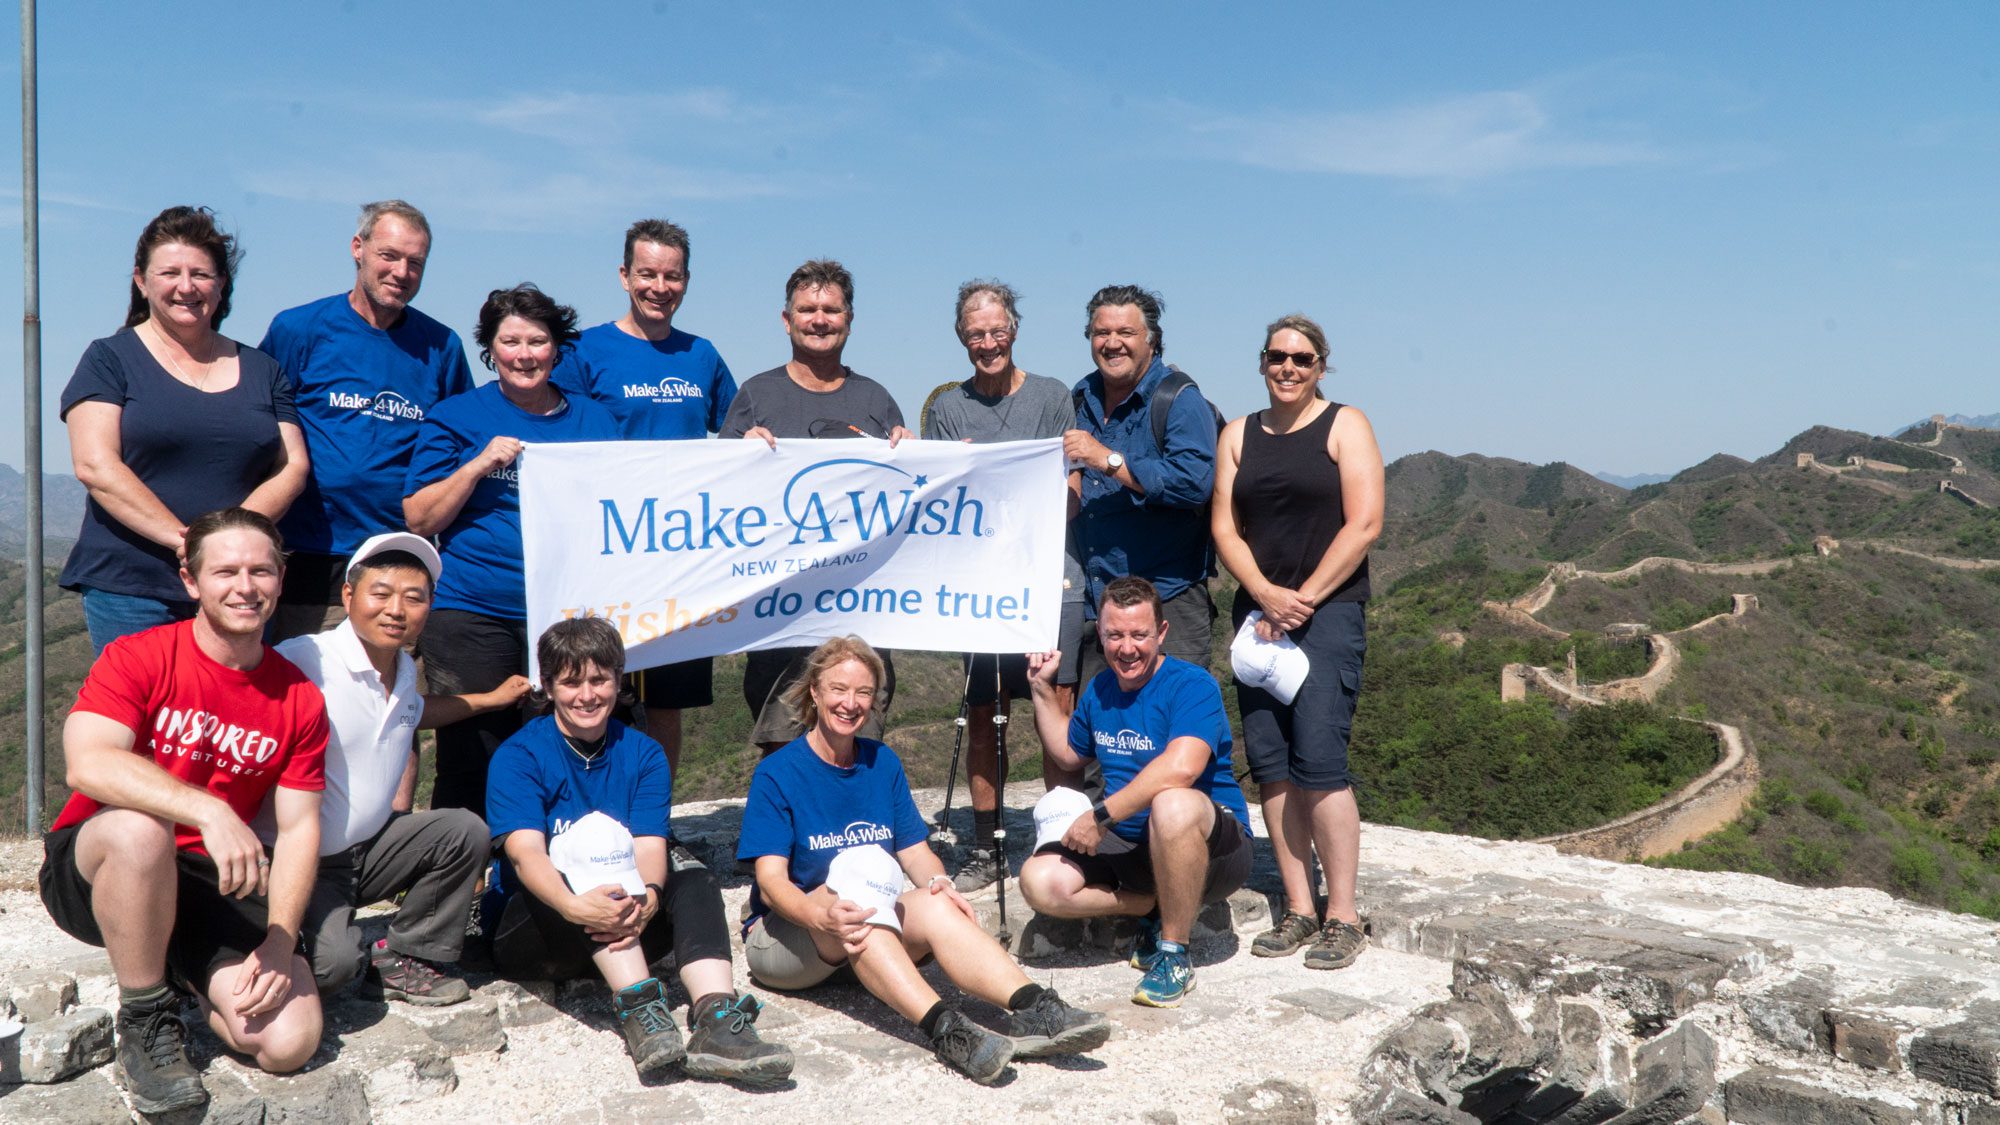 Team photo for Make-A-Wish Foundation on the Great Wall of China